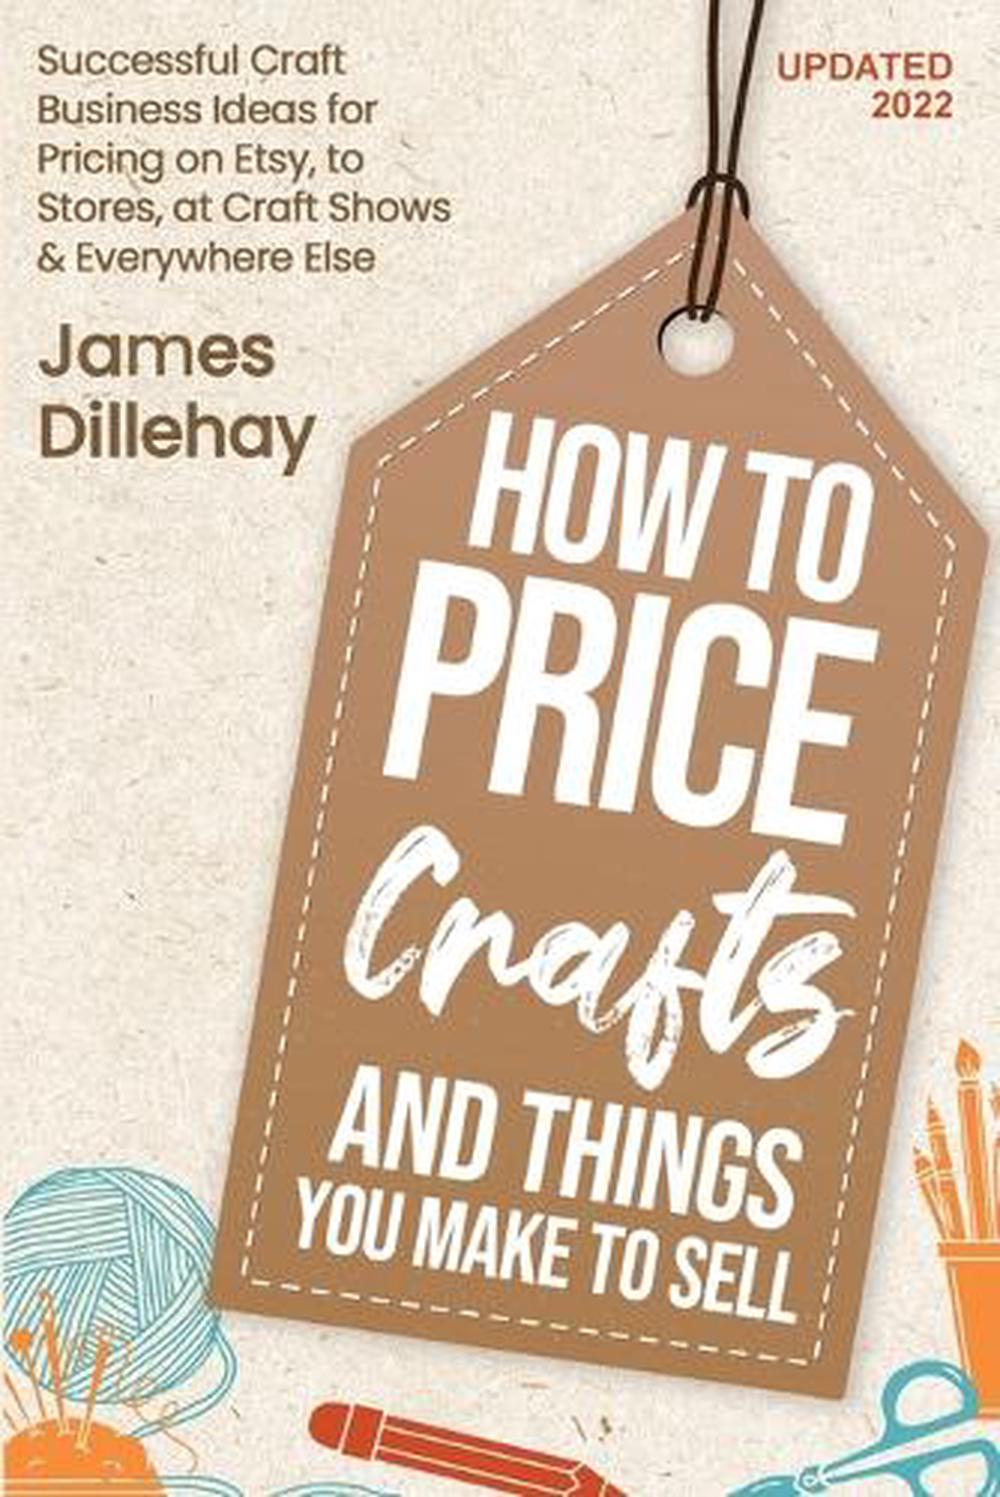 How to Price Crafts and Things You Make to Sell by James Dillehay